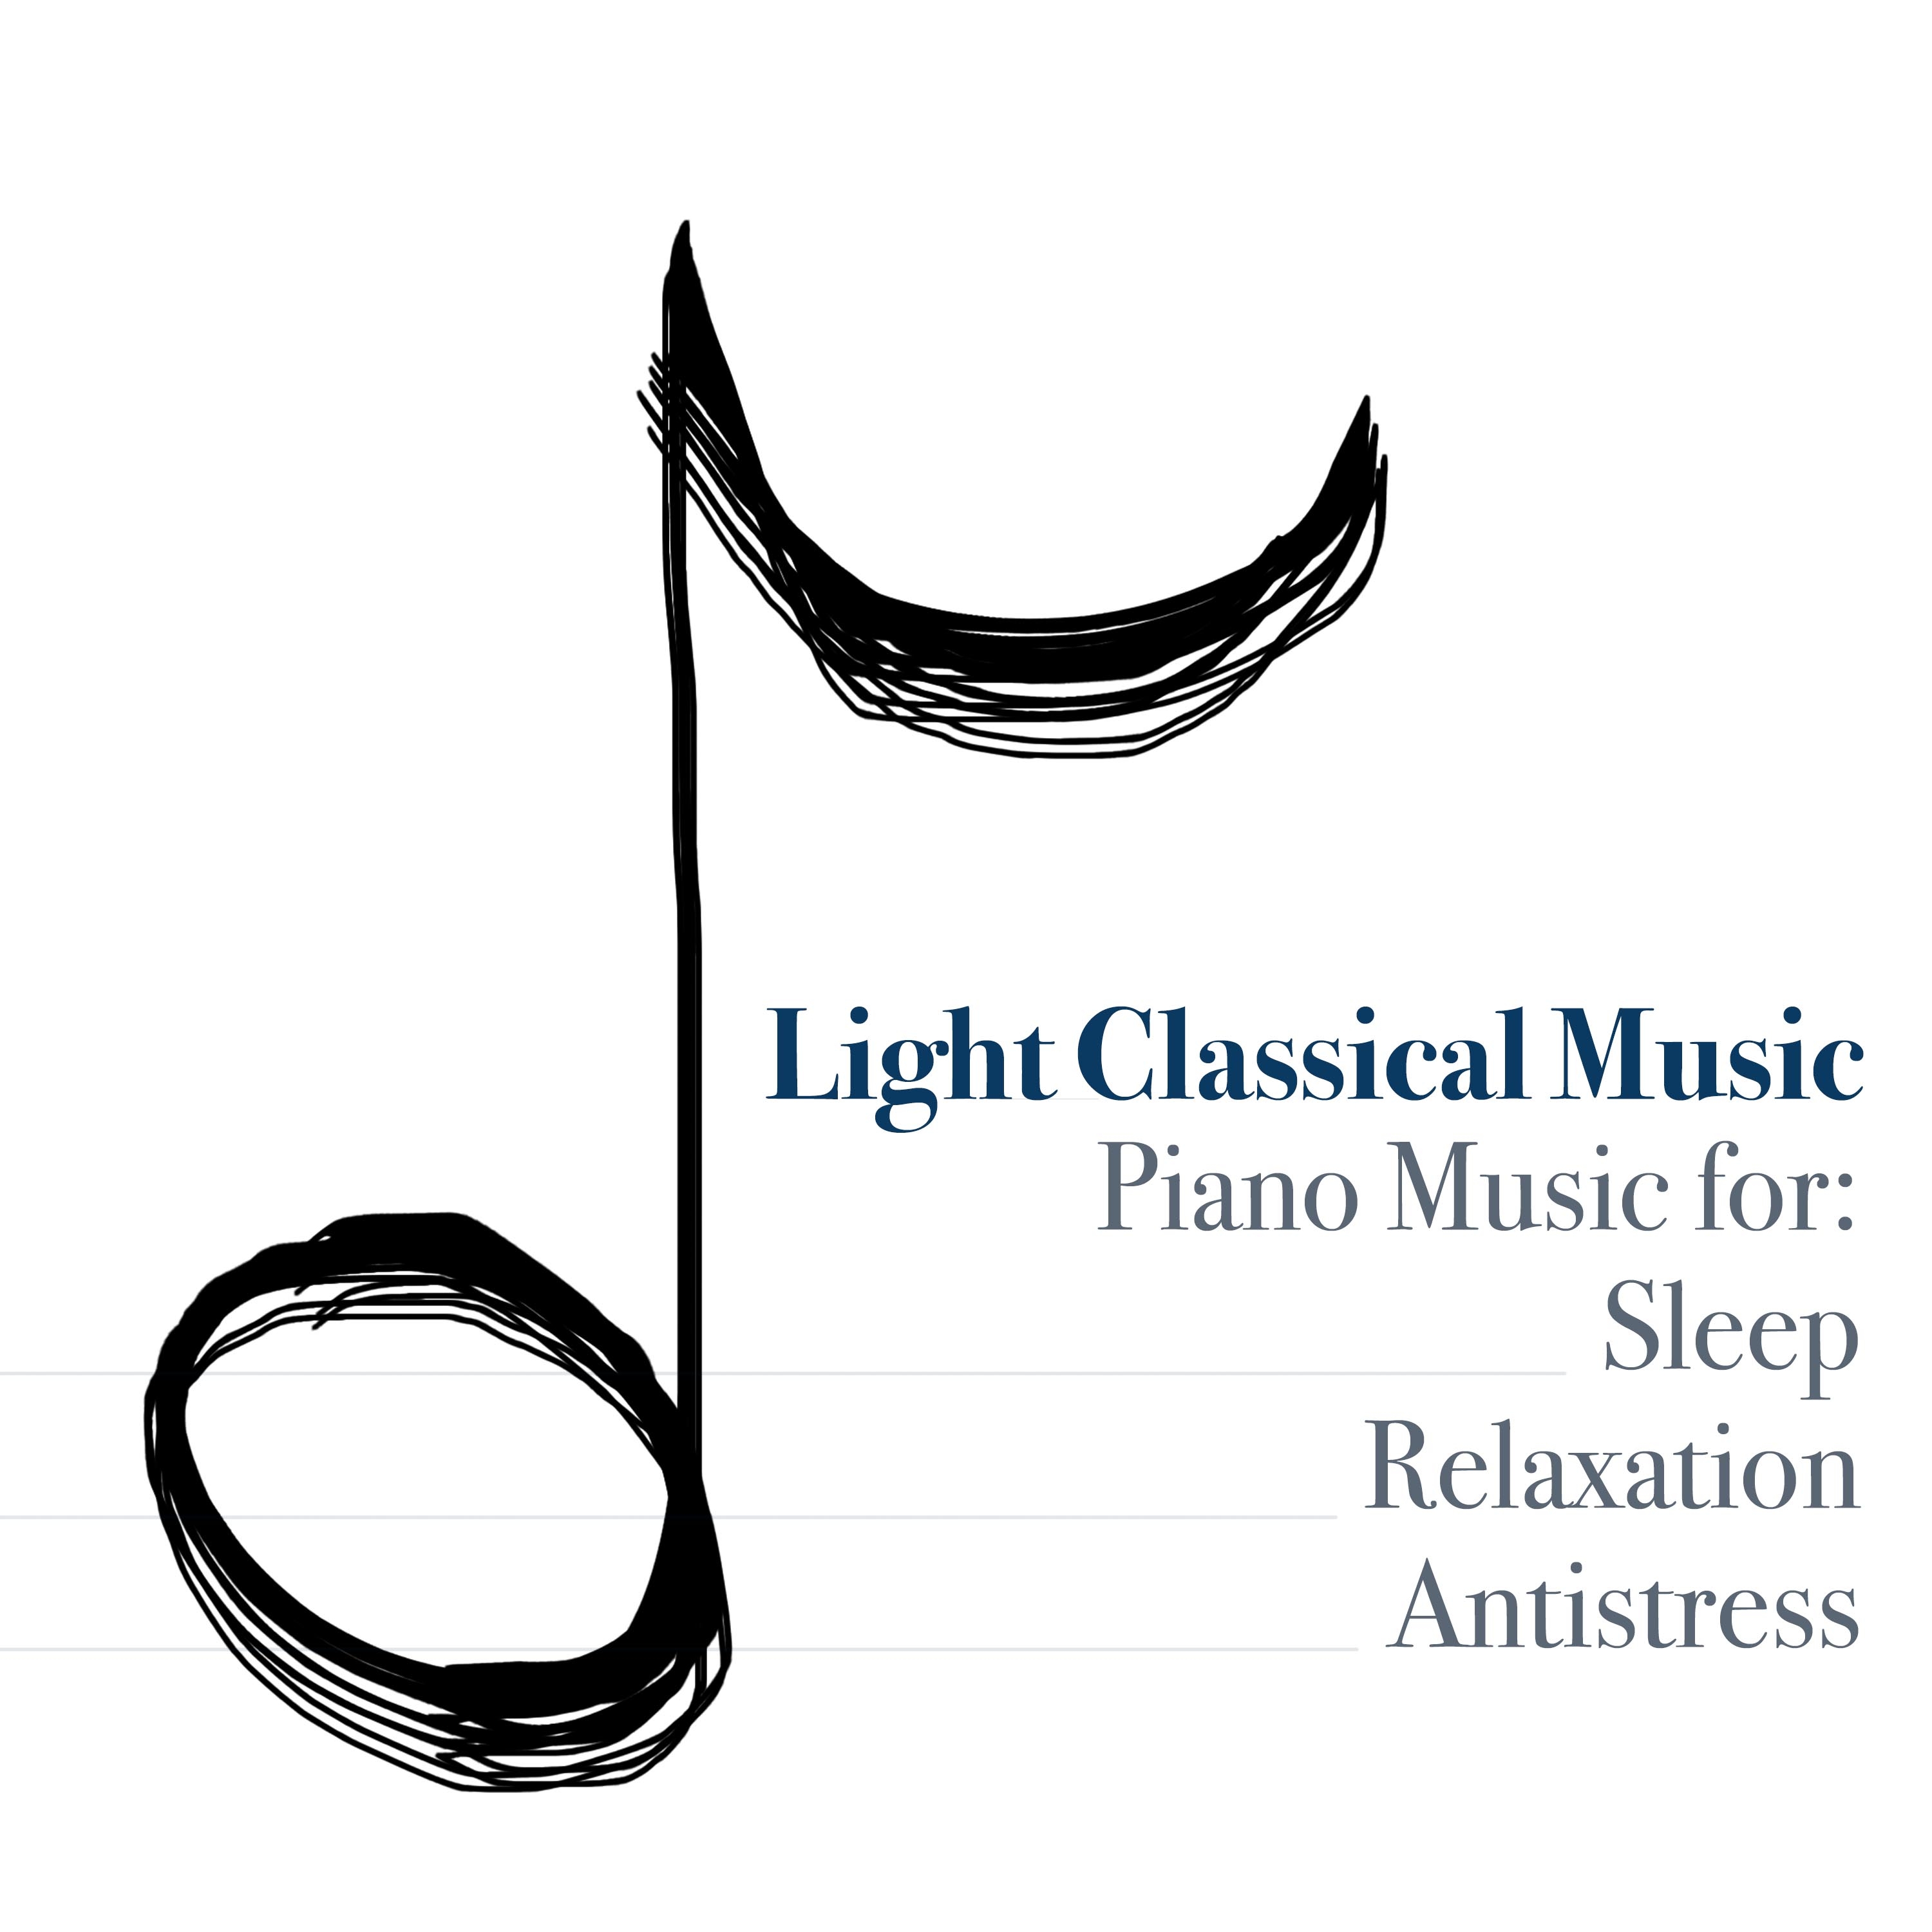 Light Classical Music: Light Classical Music Radio, Piano Music for Sleep, Relaxation, AntiStress